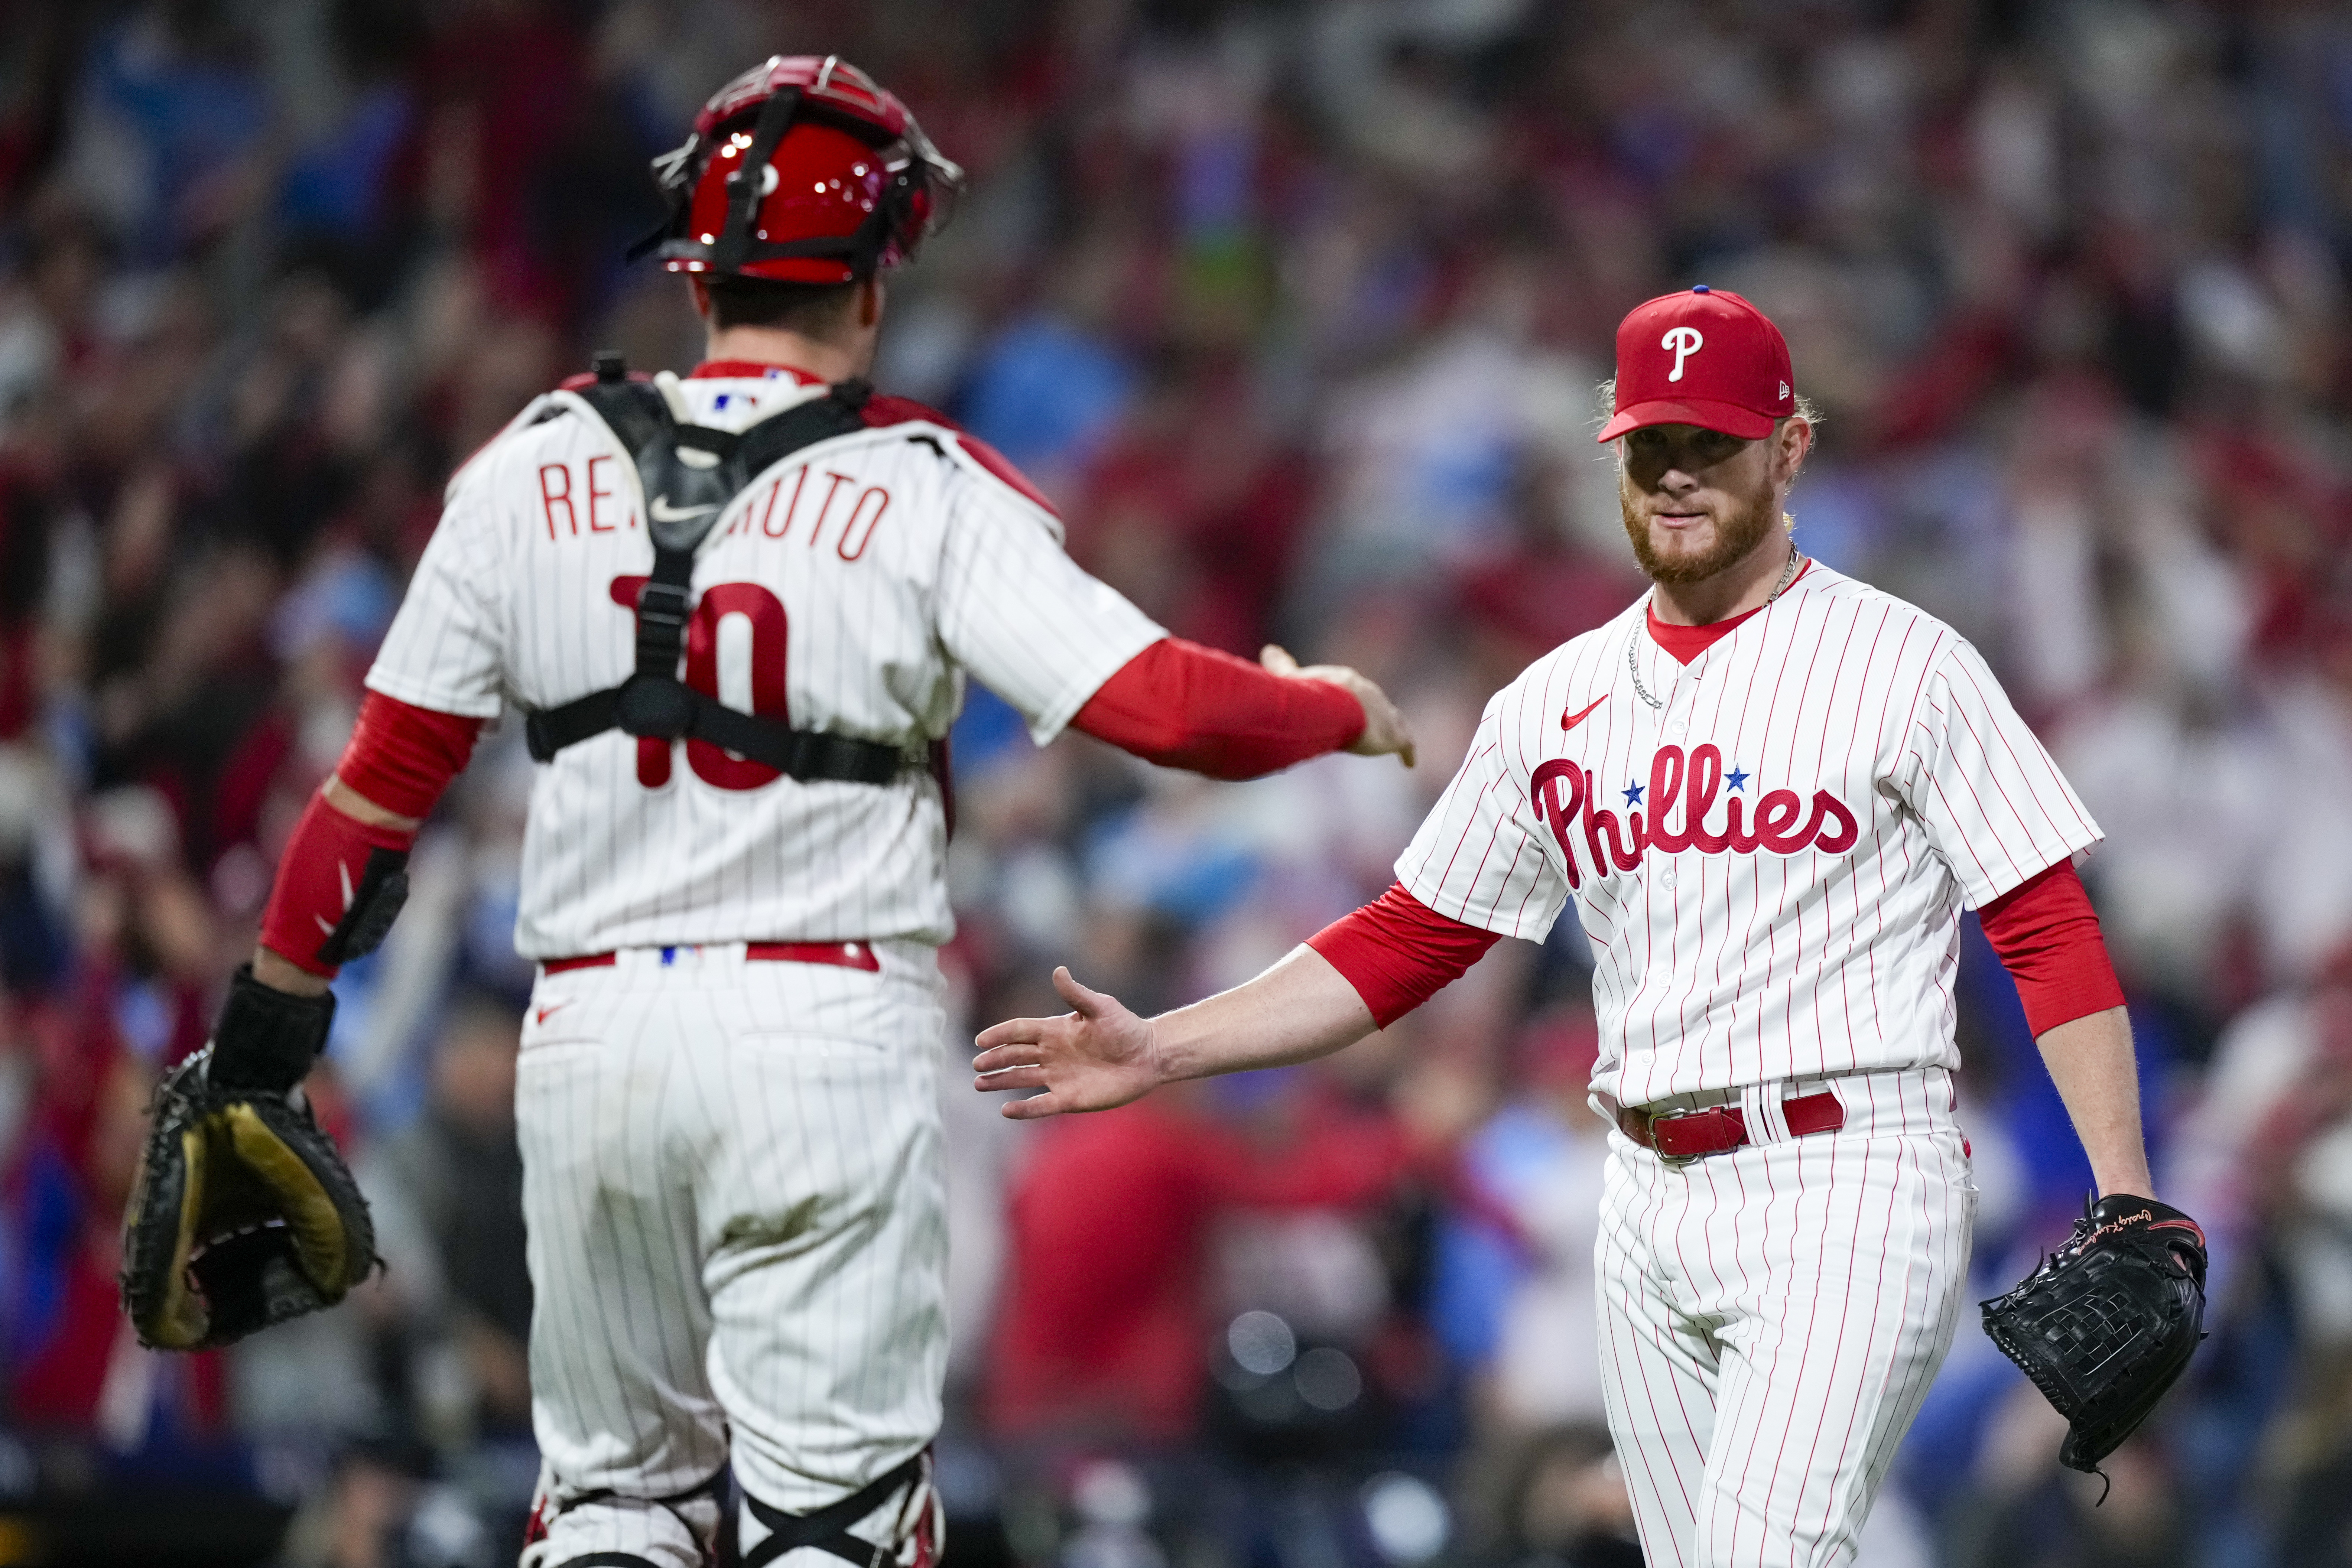 The Phillies' Craig Kimbrel knows the closer role has changed, but